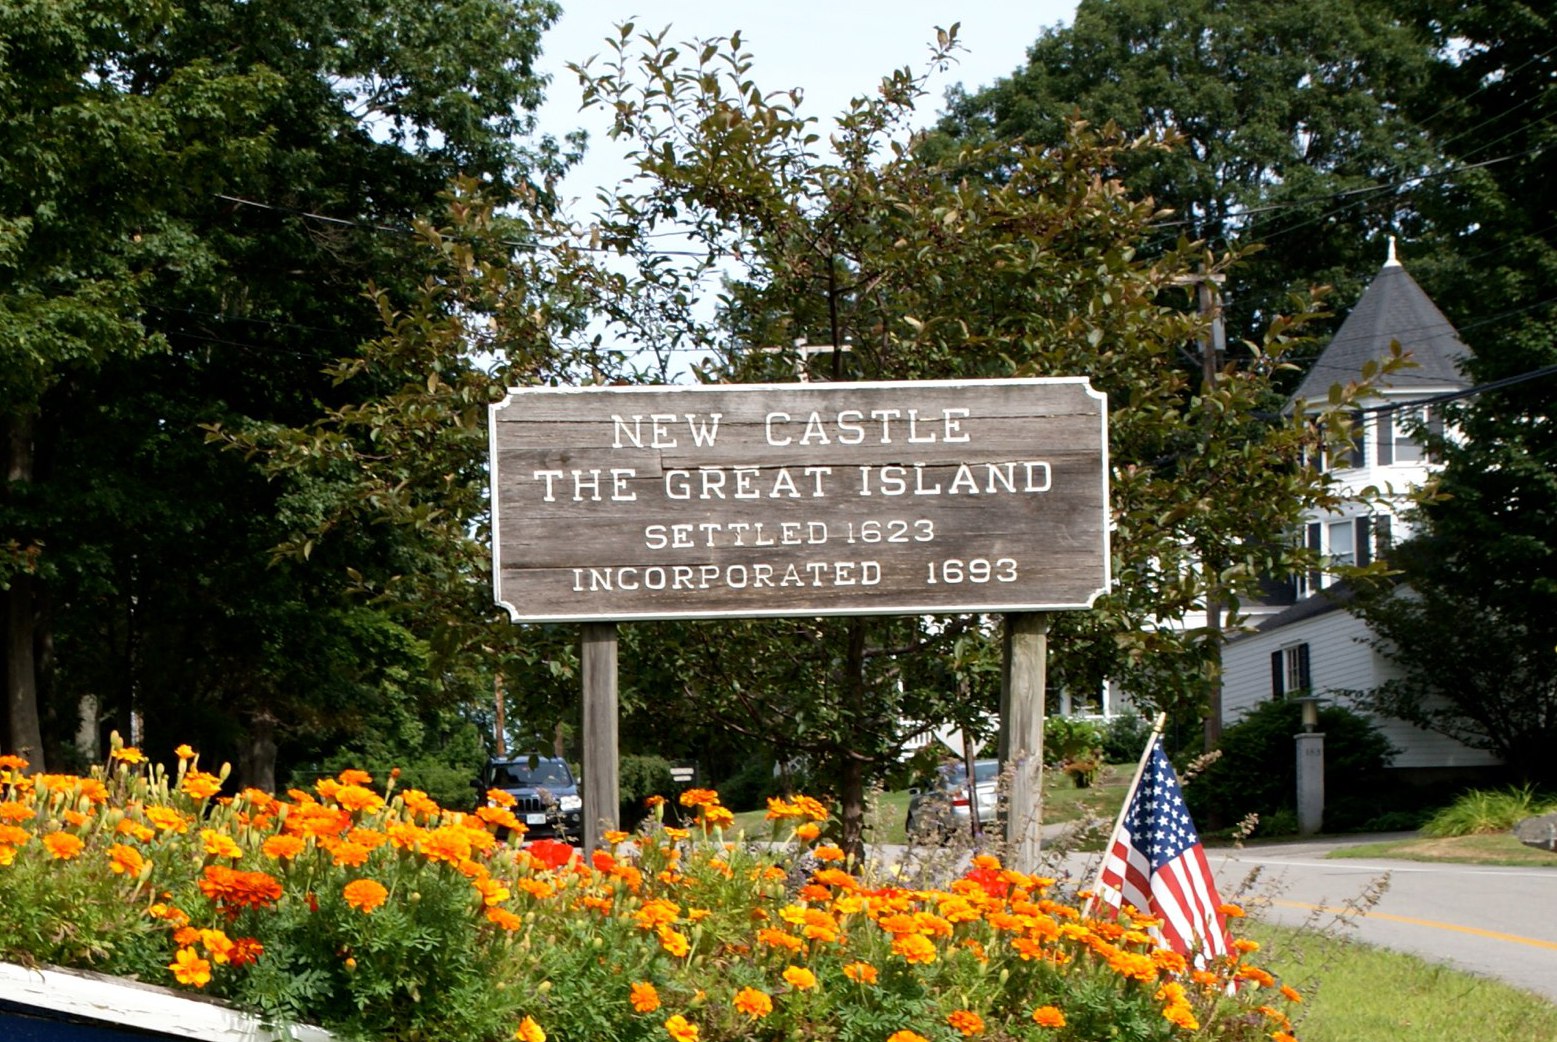 Even today, New Castle pays homage to its earlier name of Great Island.